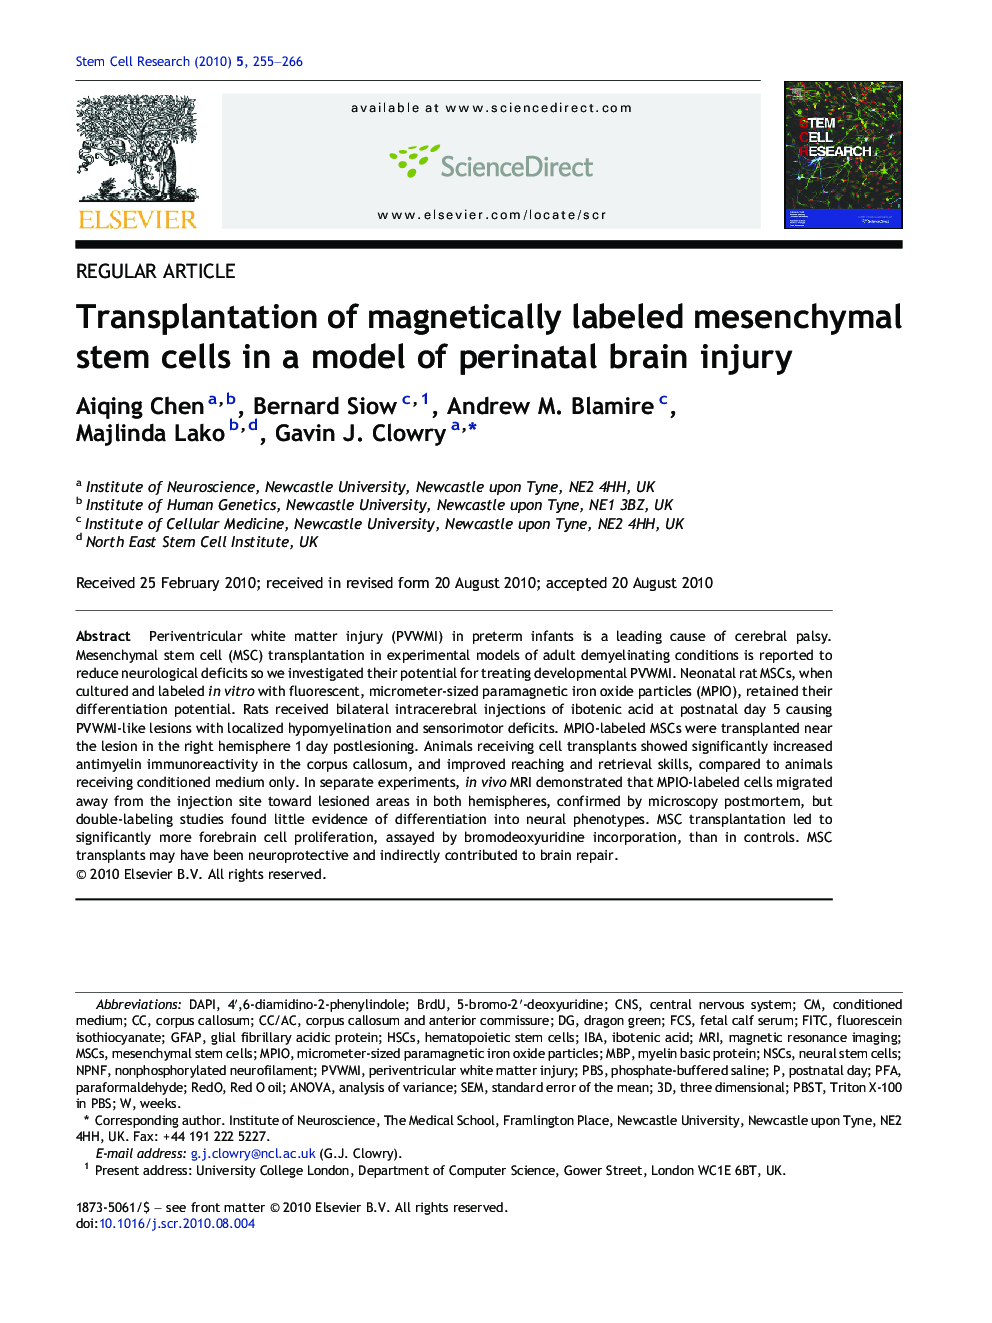 Transplantation of magnetically labeled mesenchymal stem cells in a model of perinatal brain injury